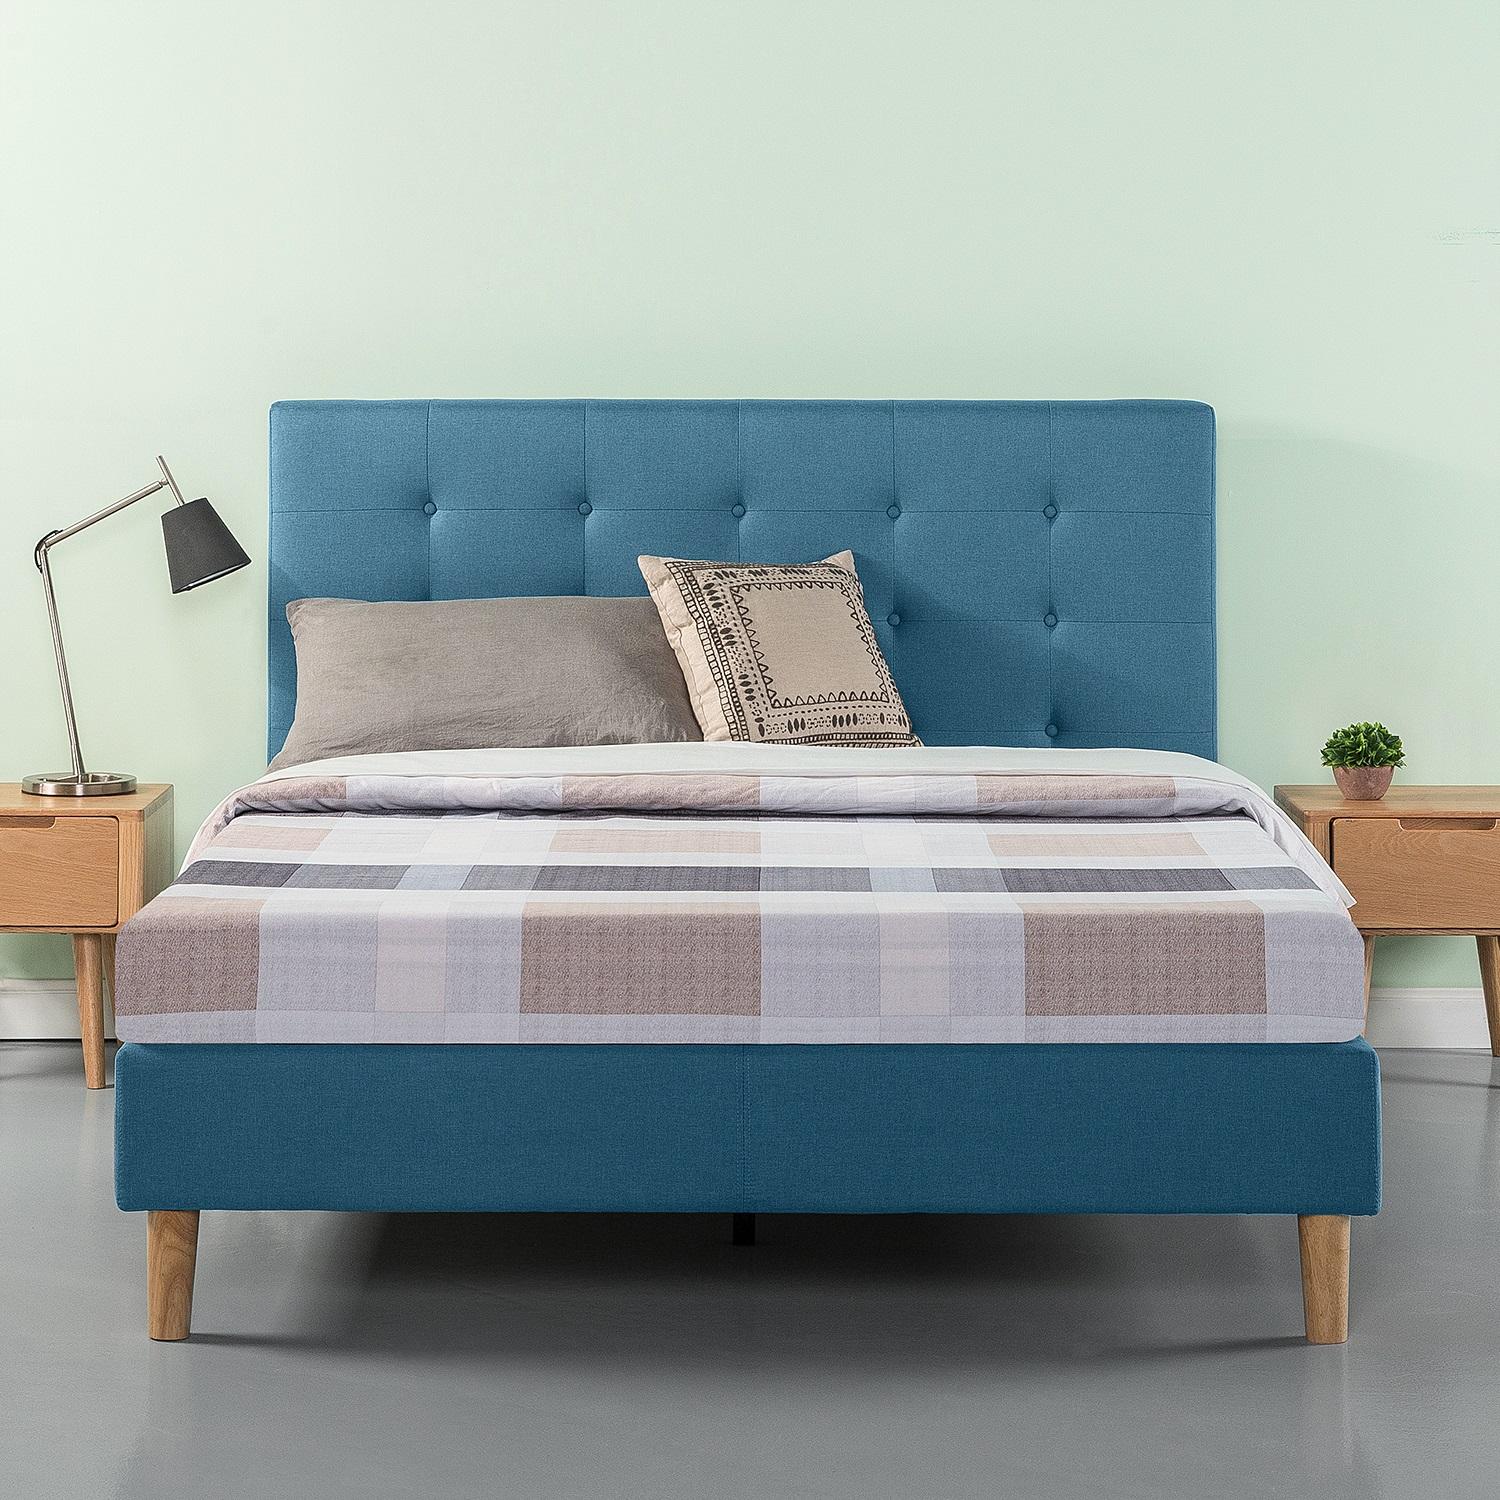 Zinus Ibidun 42in Blue Upholstered Tufted Platform King Bed for $150 Shipped